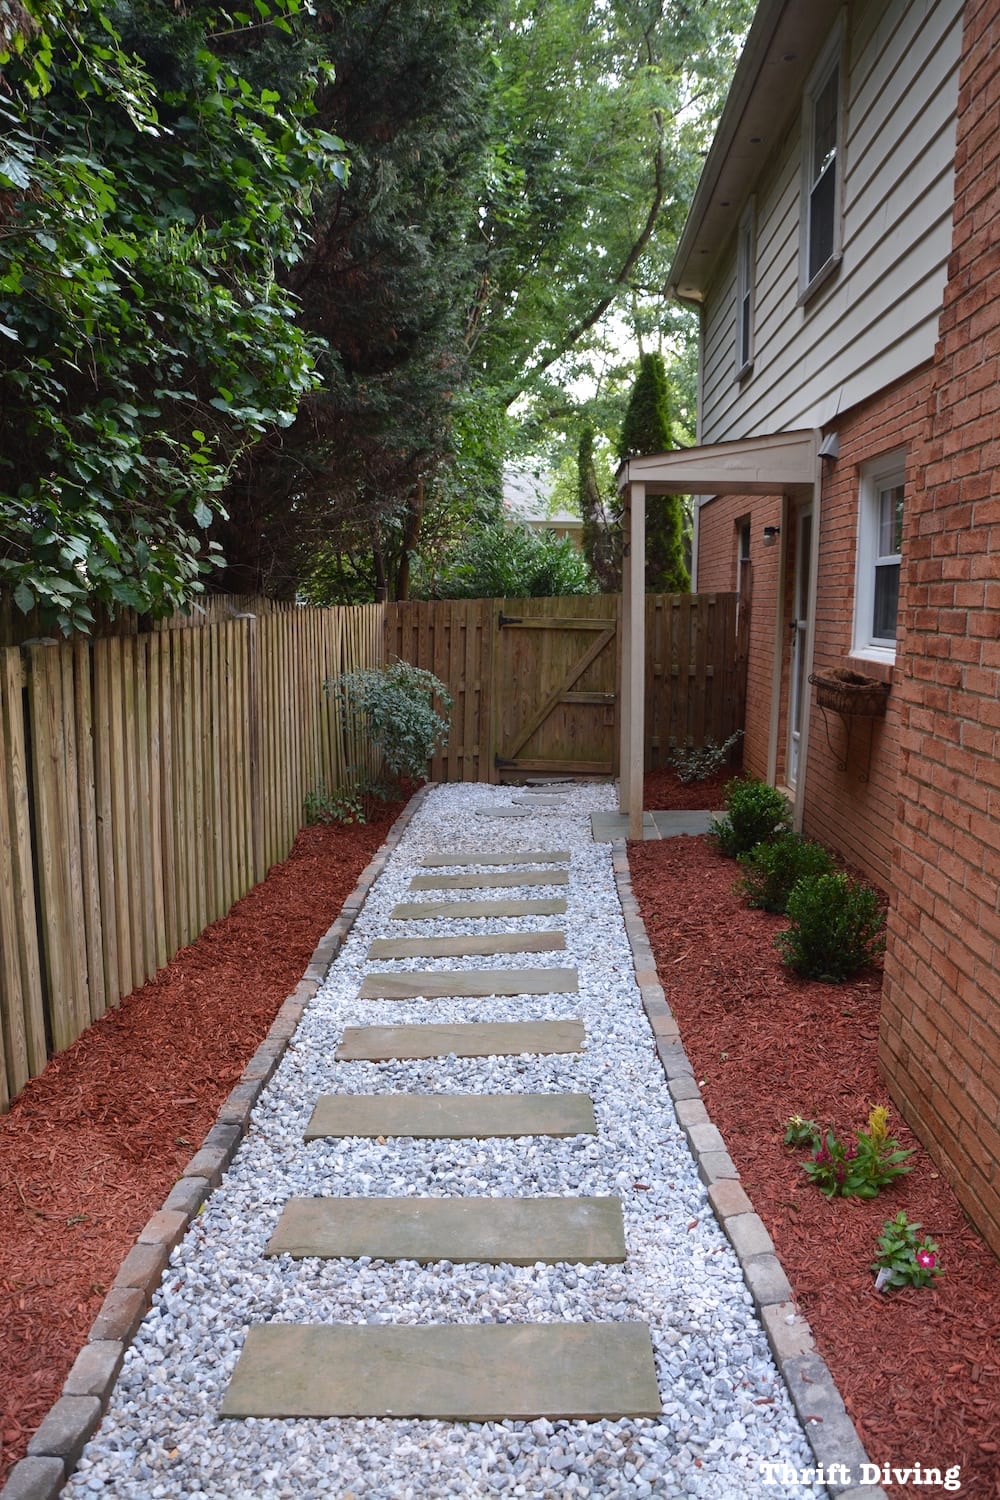 How to Create Landscape Beds - AFTER - Use edgers and mulch to define the area, with a DIY stone walkway. 